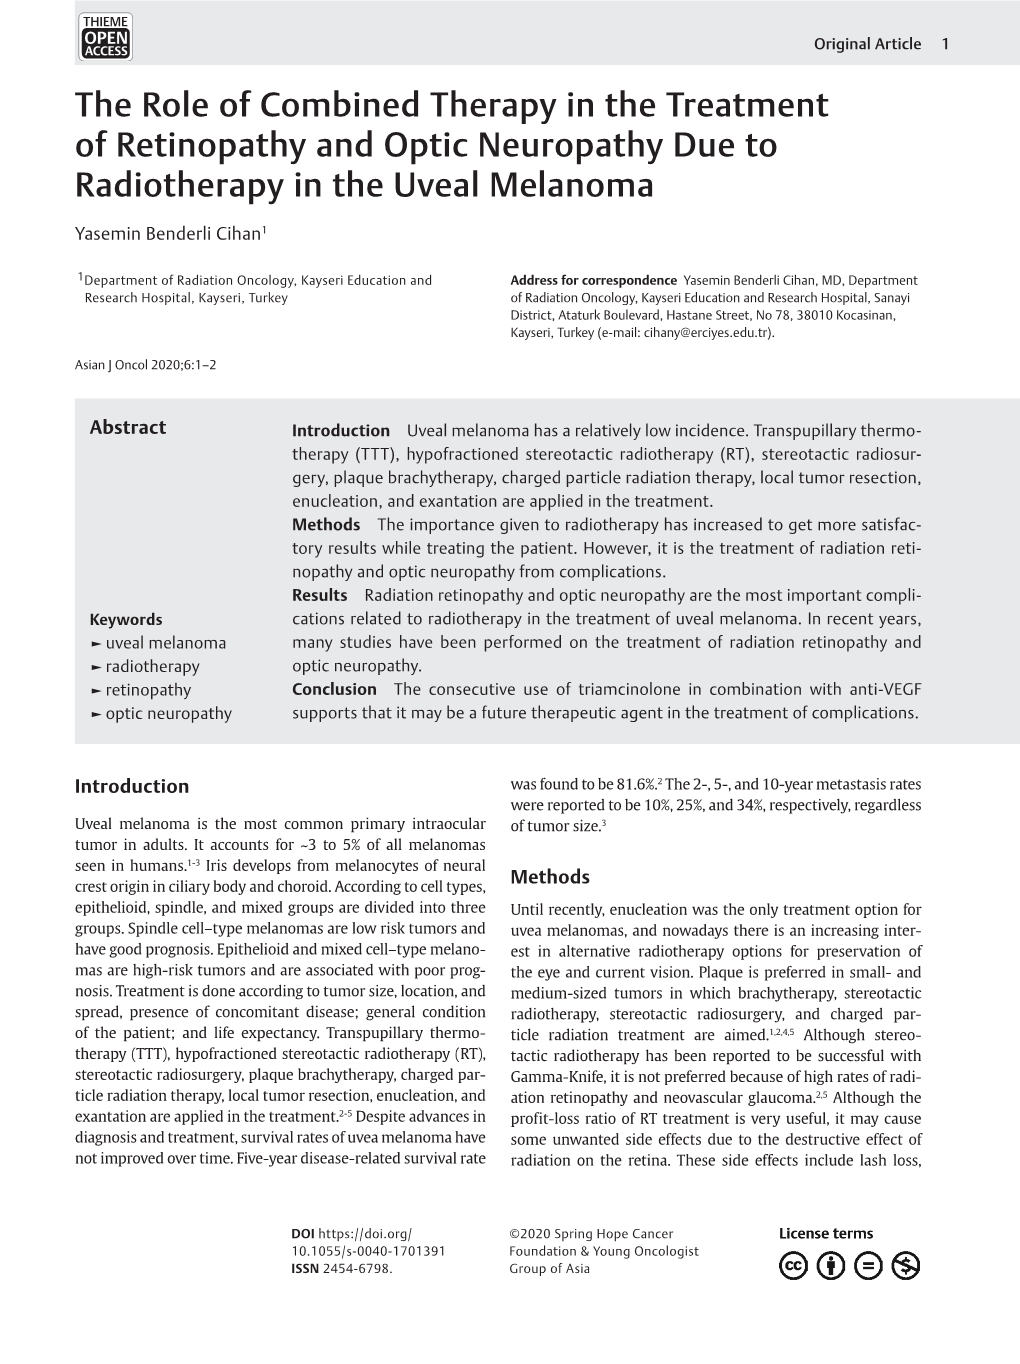 The Role of Combined Therapy in the Treatment of Retinopathy and Optic Neuropathy Due to Radiotherapy in the Uveal Melanoma